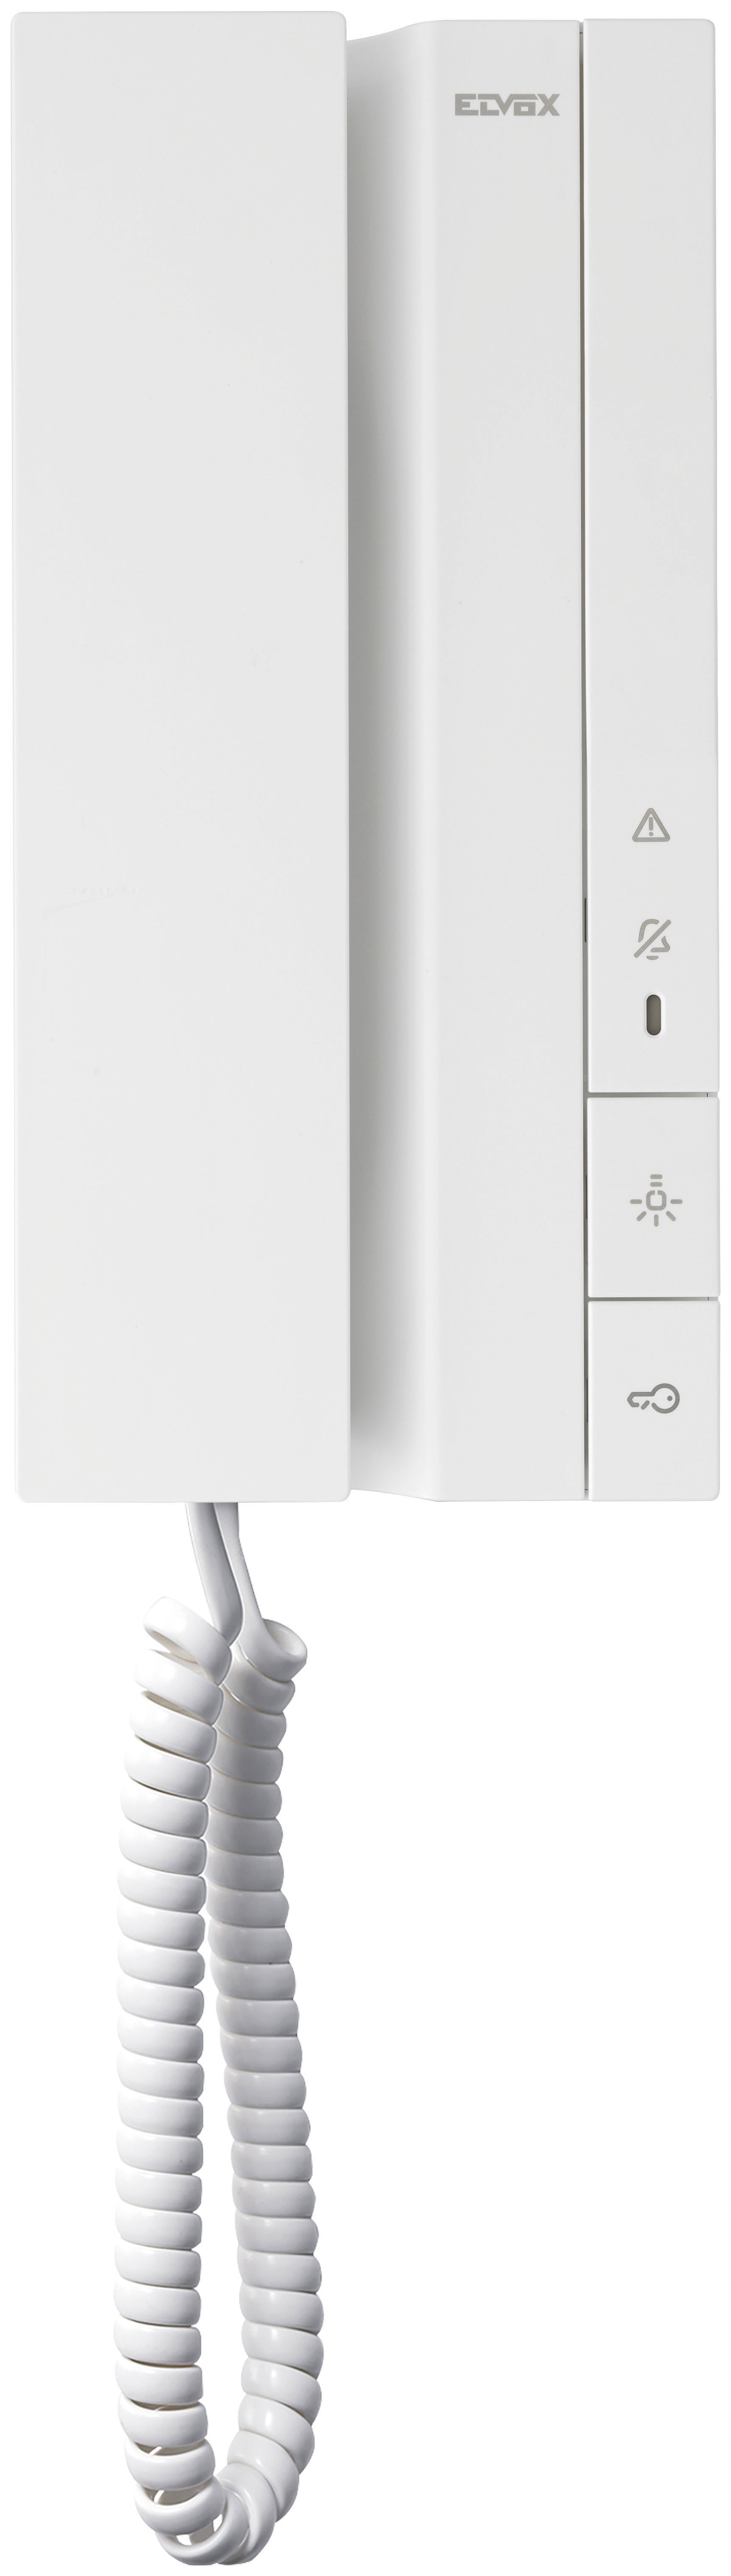 ELVOX VOXIE DUE FILI+ 2-WIRE INTERCOM HANDSET WITH 2 BUTTON WHITE APARTMENT/RESIDENTIAL PLASTIC POWER BY BUS CONTROLLER